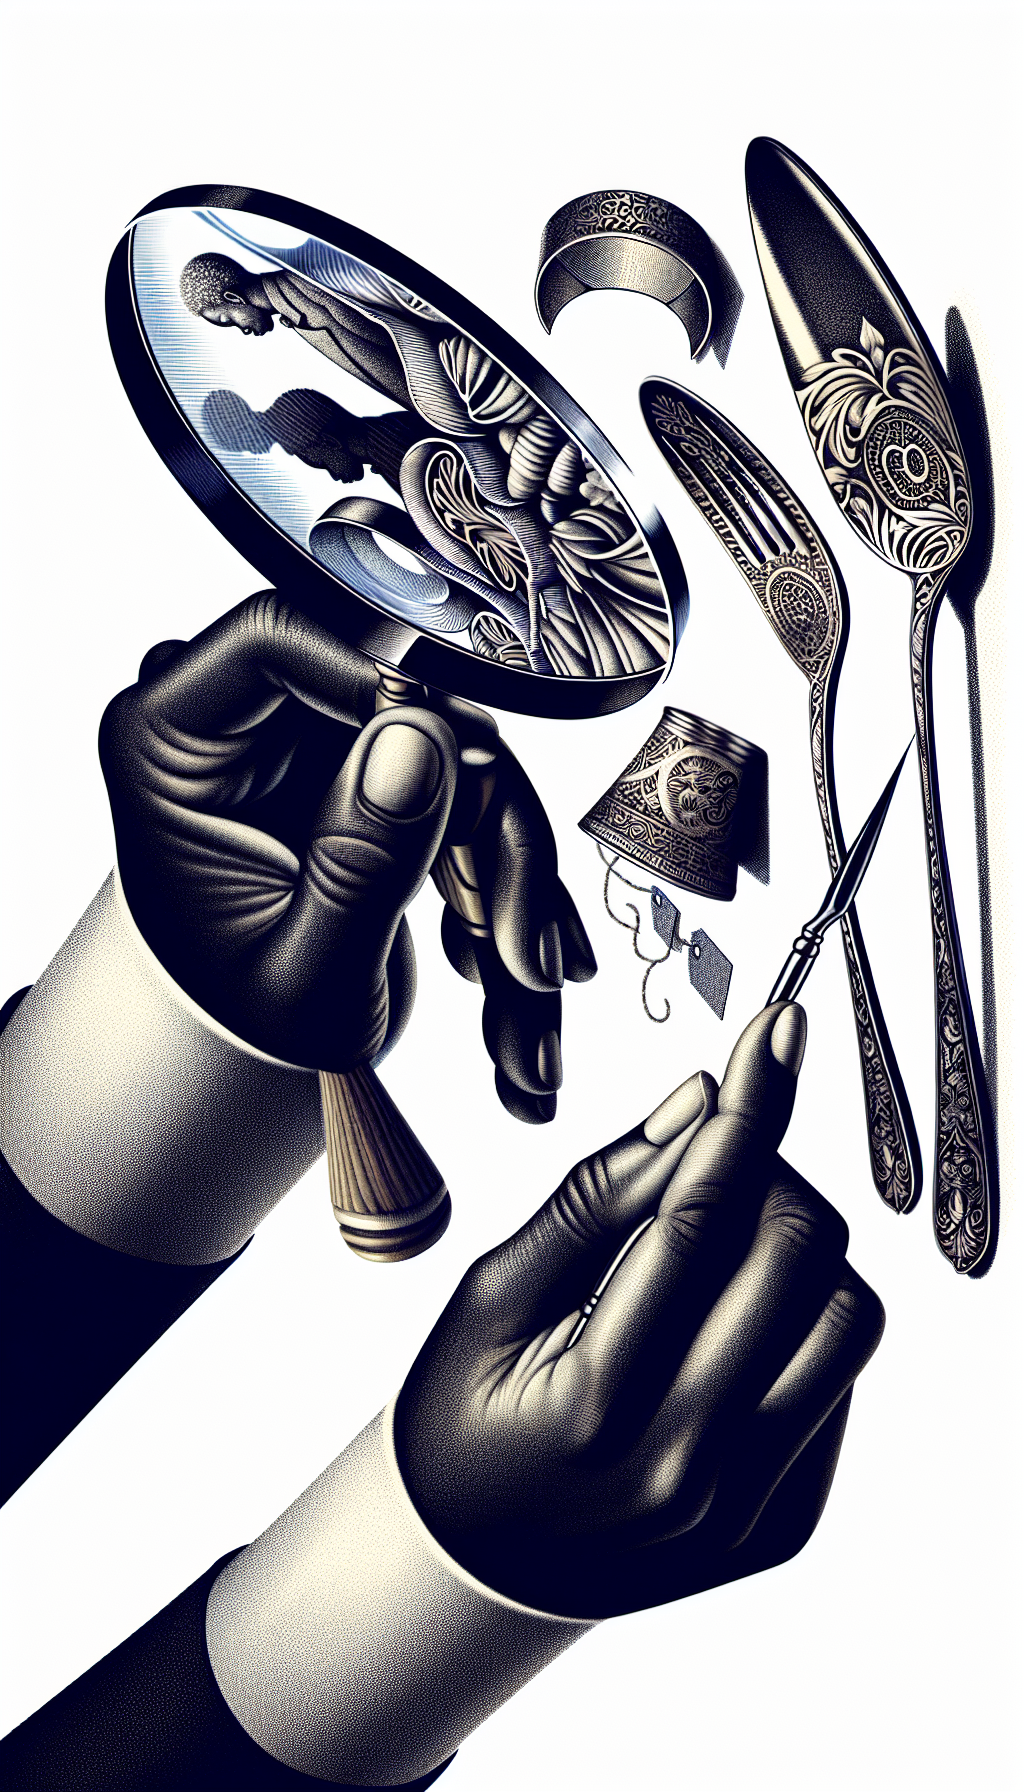 An illustration depicts an artisan's hands delicately engraving intricate patterns into a piece of antique silverware, highlighting the era's distinctive style. In the background, a magnifying glass looms over, with price tags visible through its lens reflecting the silverware's value, subtly connecting craft mastery with its evaluation in the antique market.